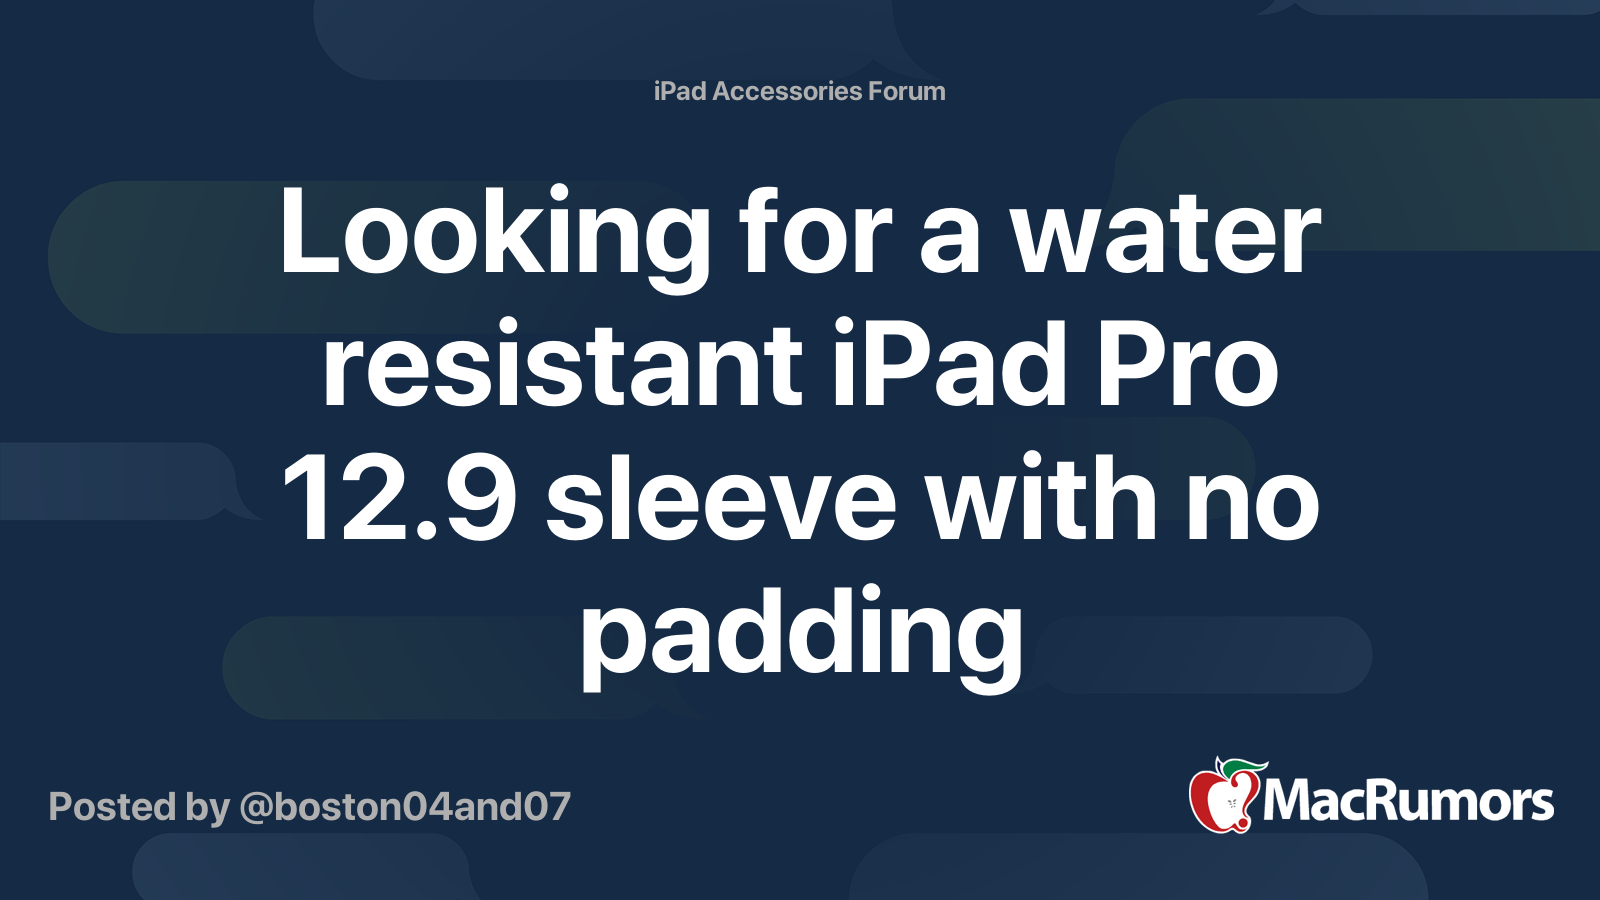 Looking for a water resistant iPad Pro 12.9 sleeve with no padding